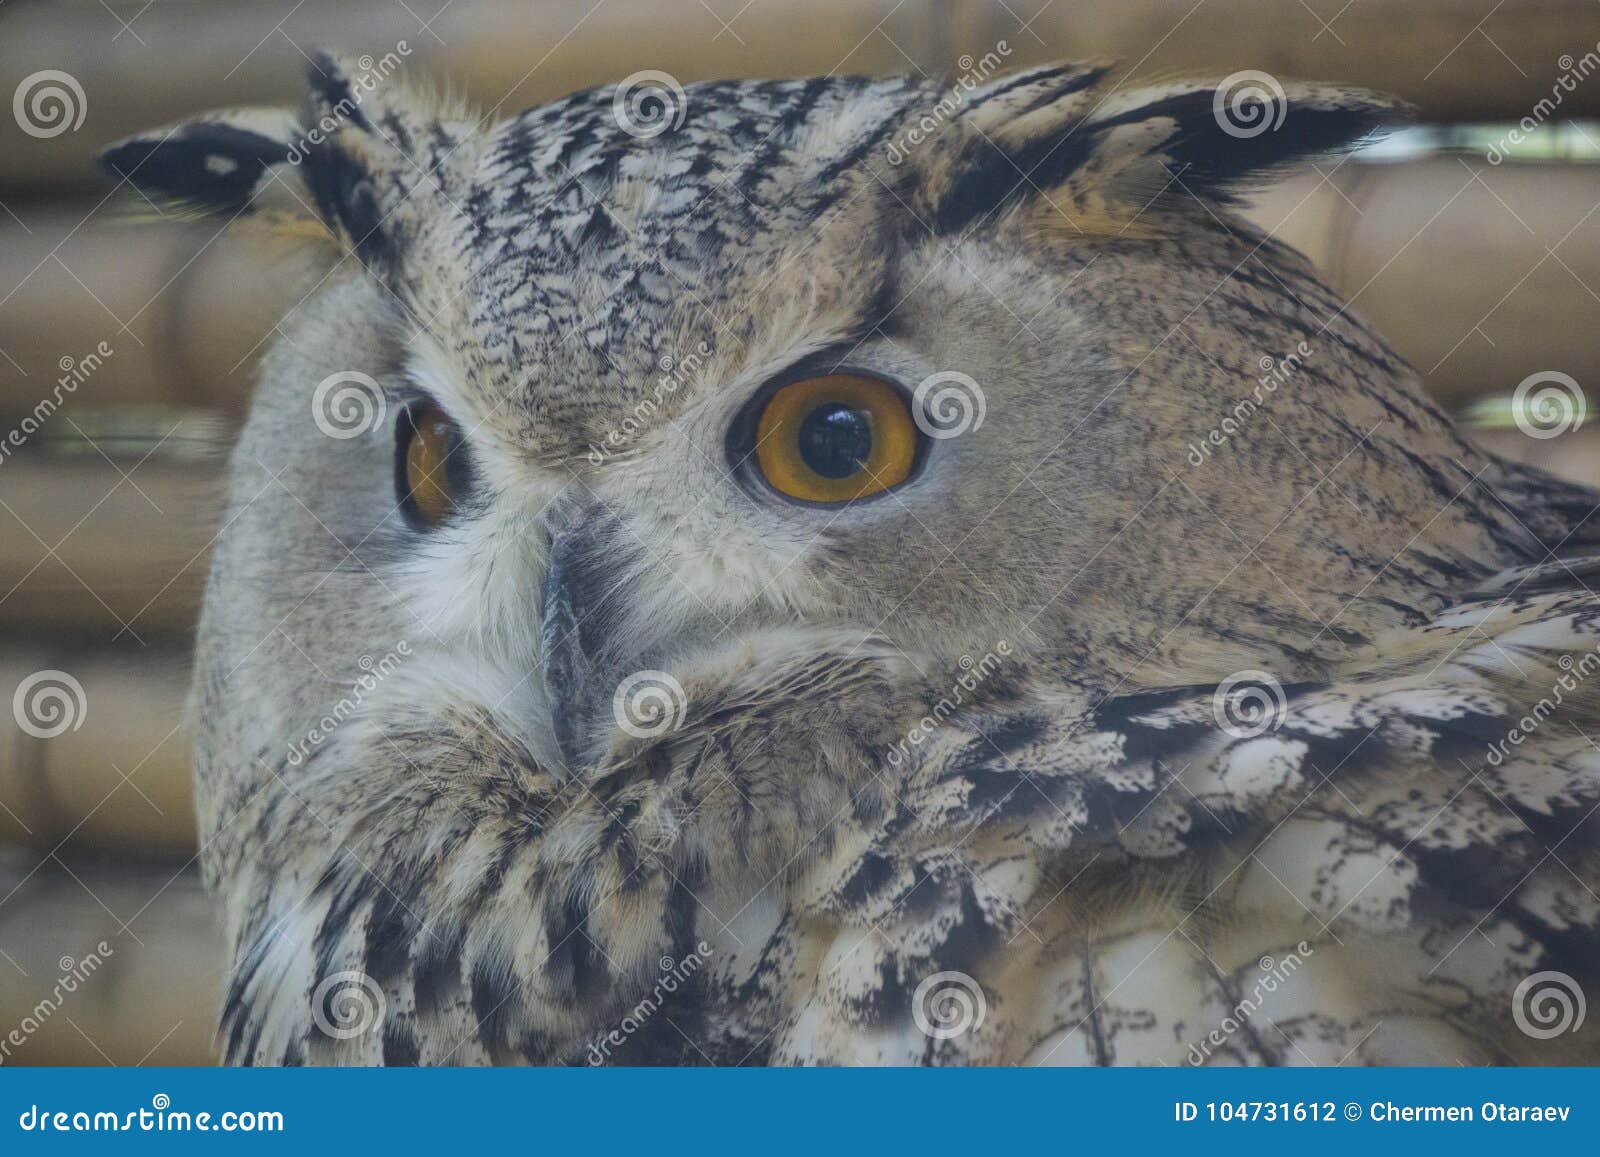 Beauty Owl Turning Its Head Back Stock Photo - Image of horned, brown ...